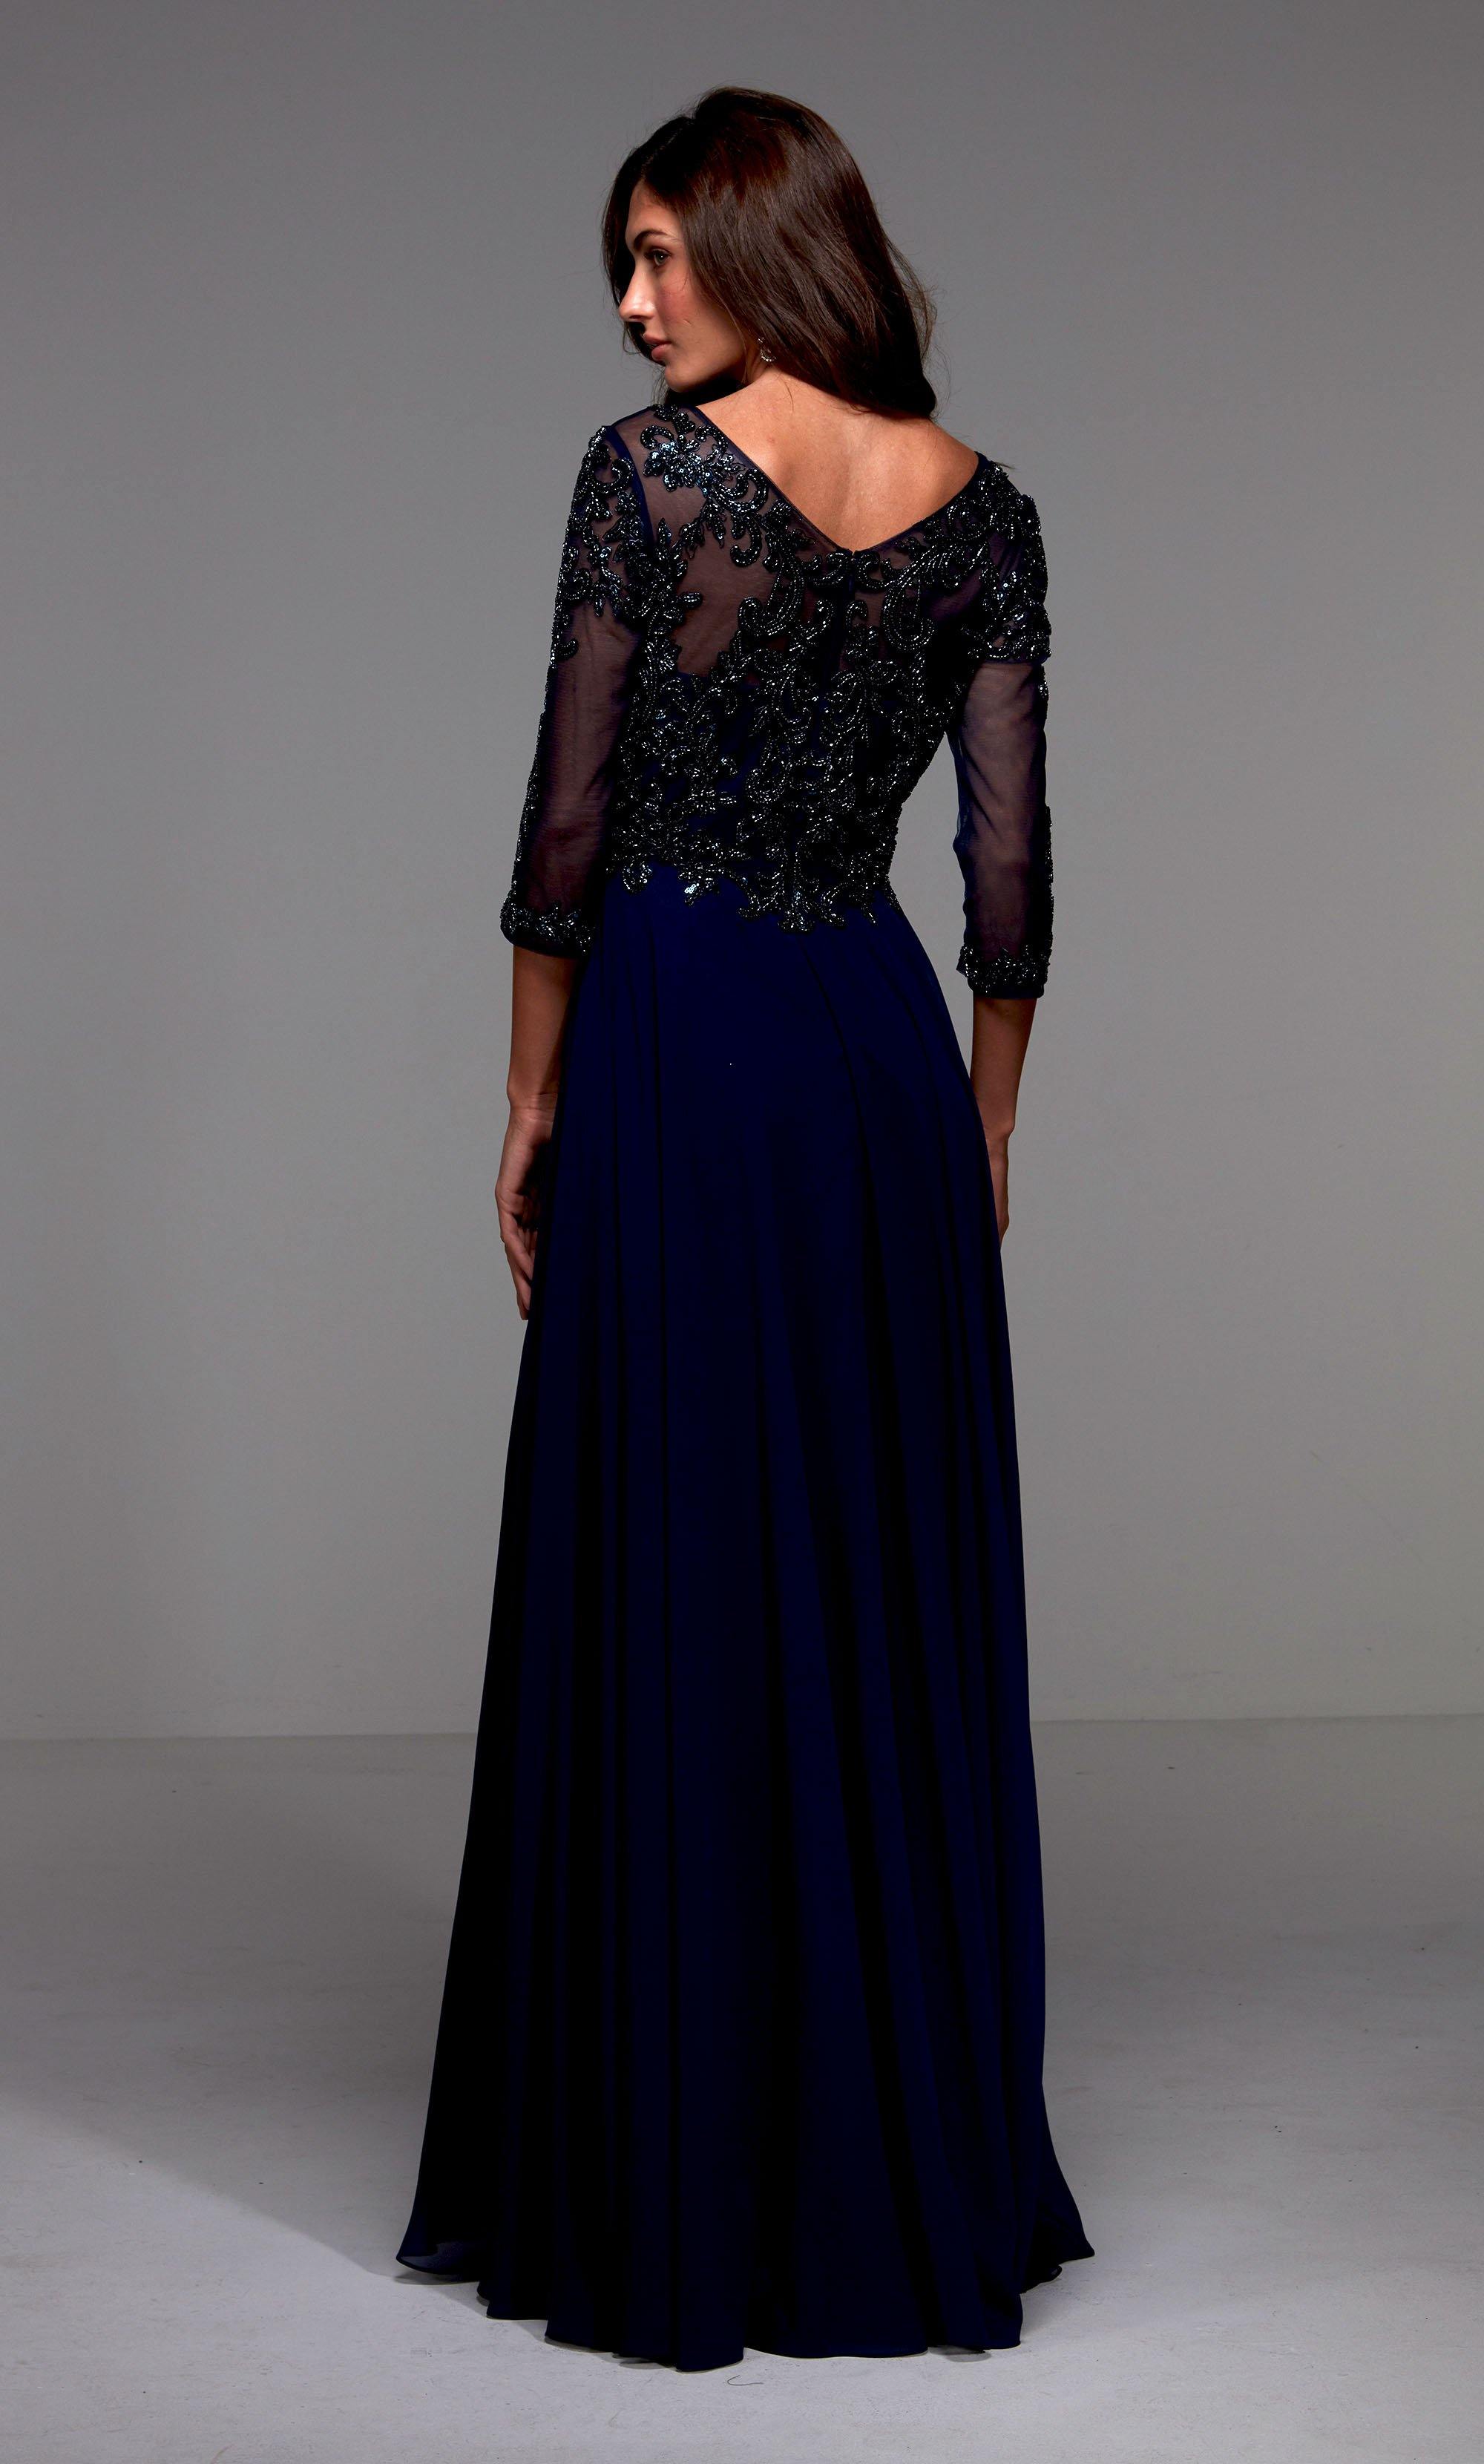 Long chiffon mother of the bride dress with sleeves and a beaded illusion bodice 